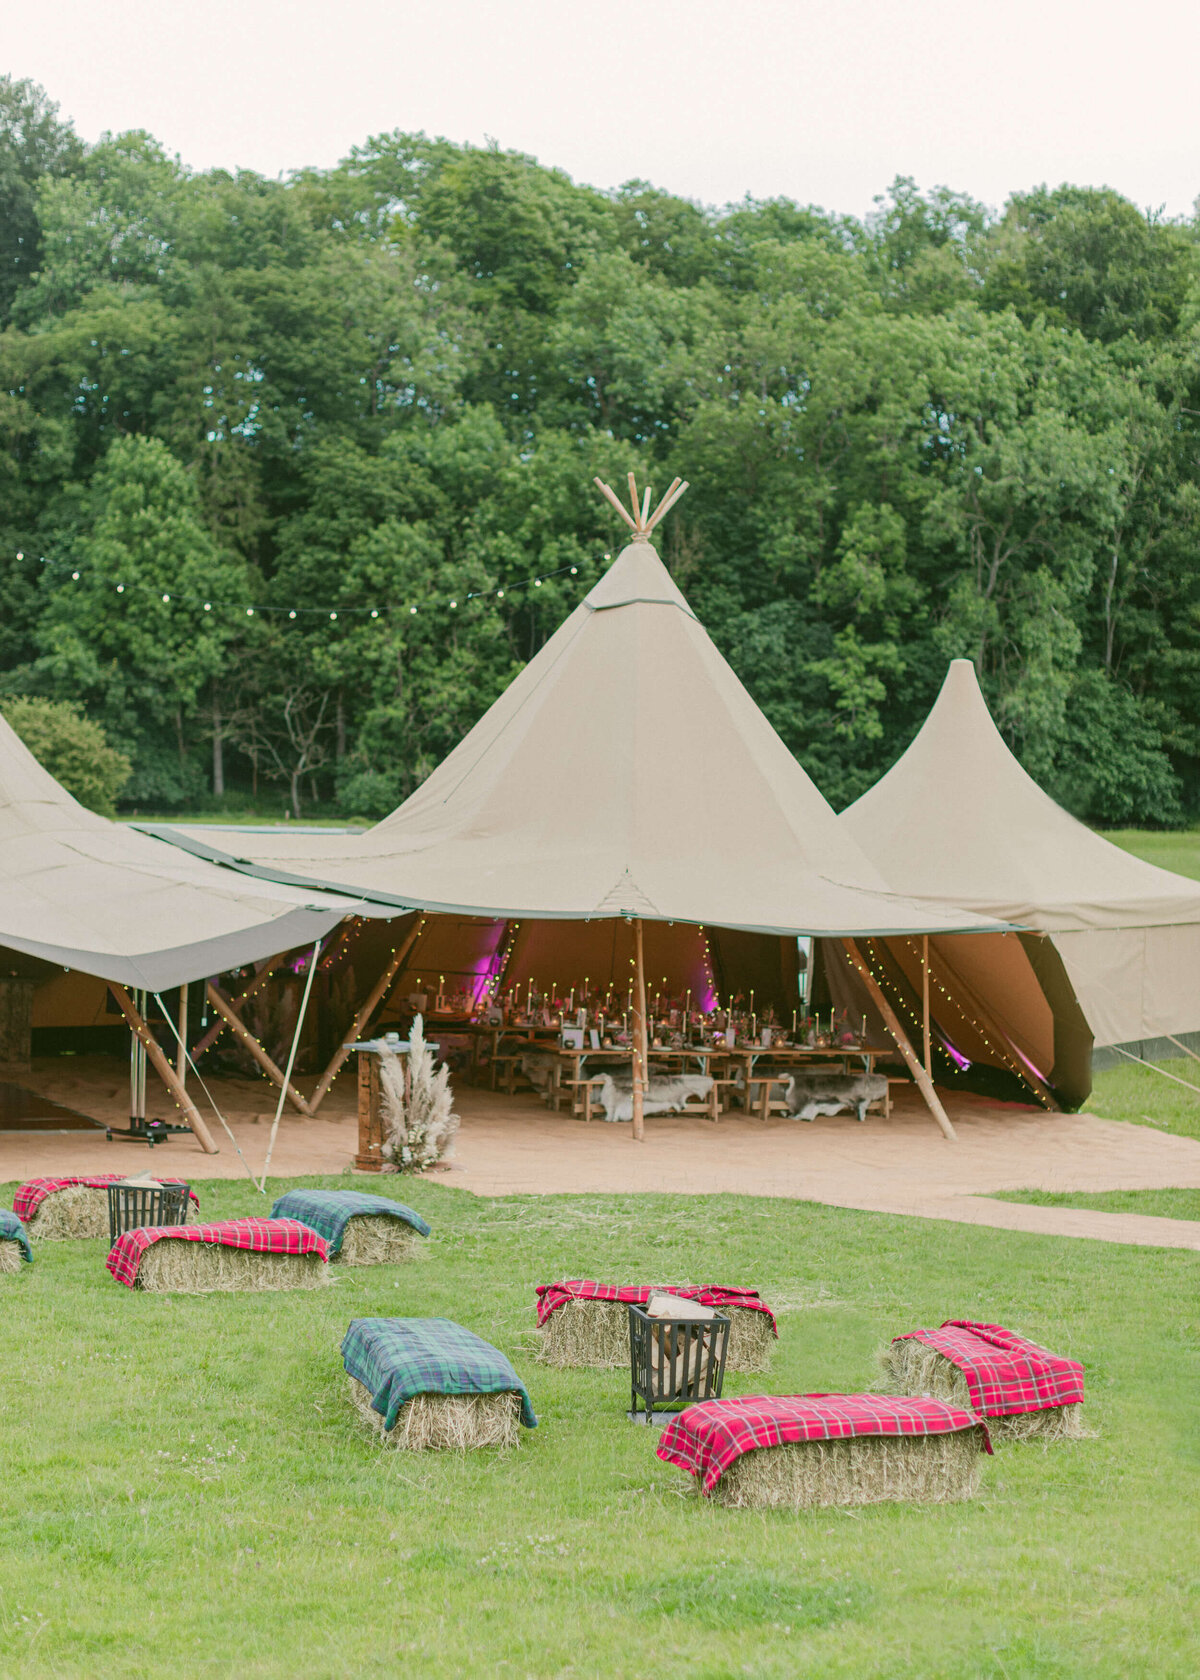 events-birthday-party-cotswolds-gsp-tipi-stretch-tent-hay-bales